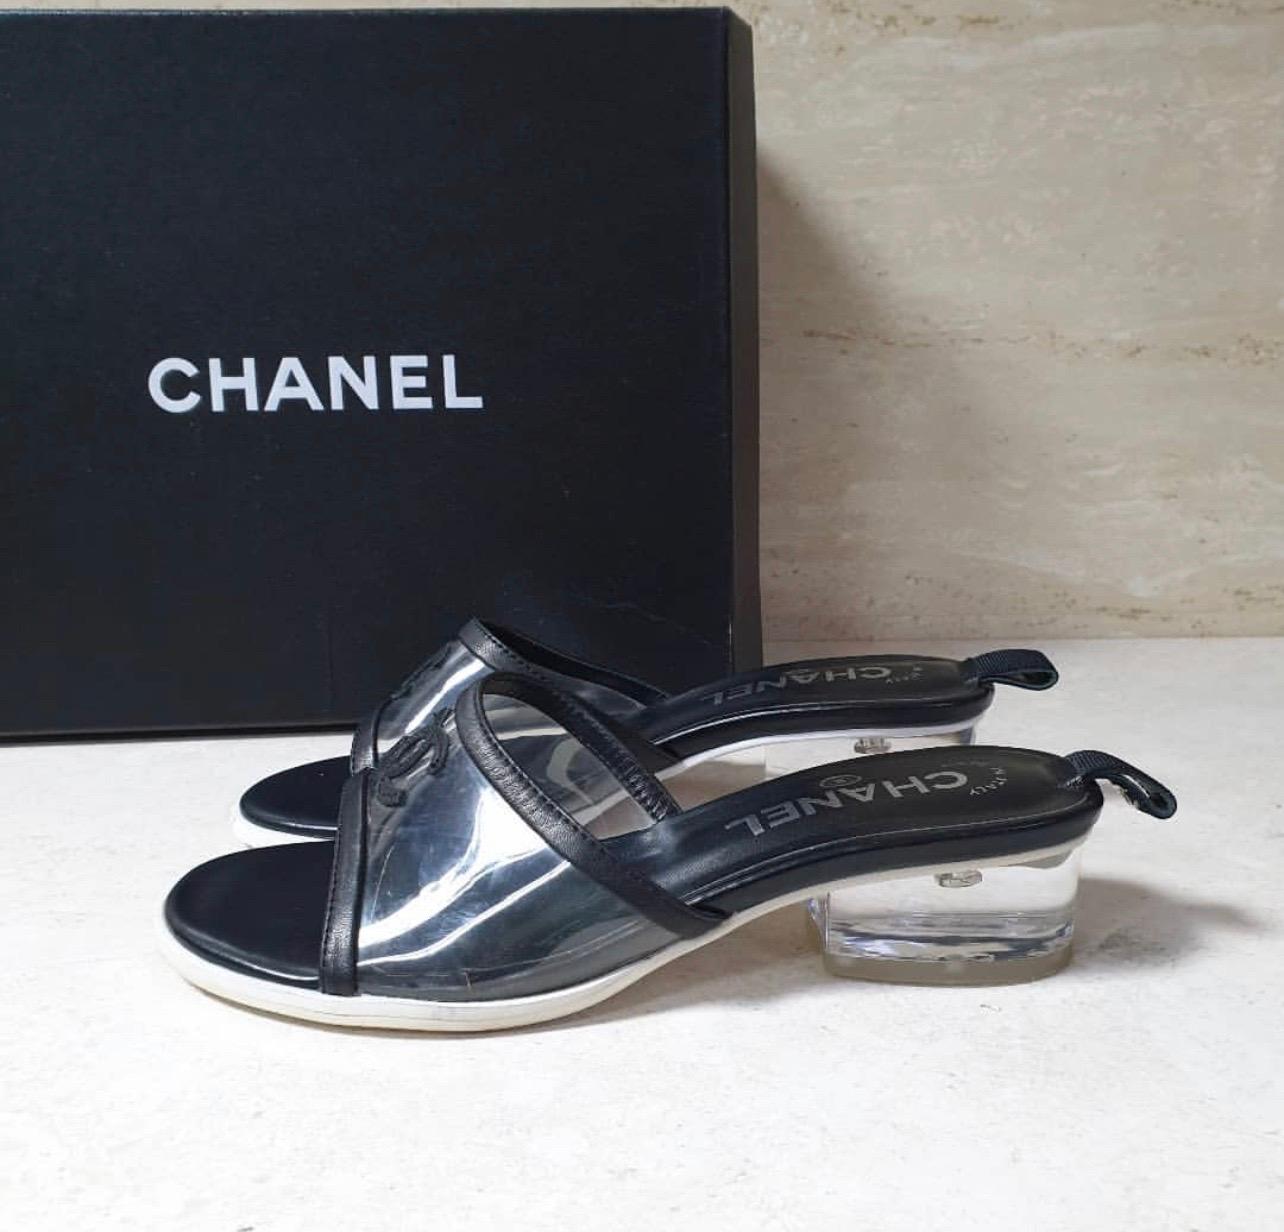 Chanel Slides
Clear
Interlocking CC Logo
Leather Trim
No original packaging.
Sz.37
Very good condition. Minor scuffs at soles; minor residue at exterior; minor wear at insoles